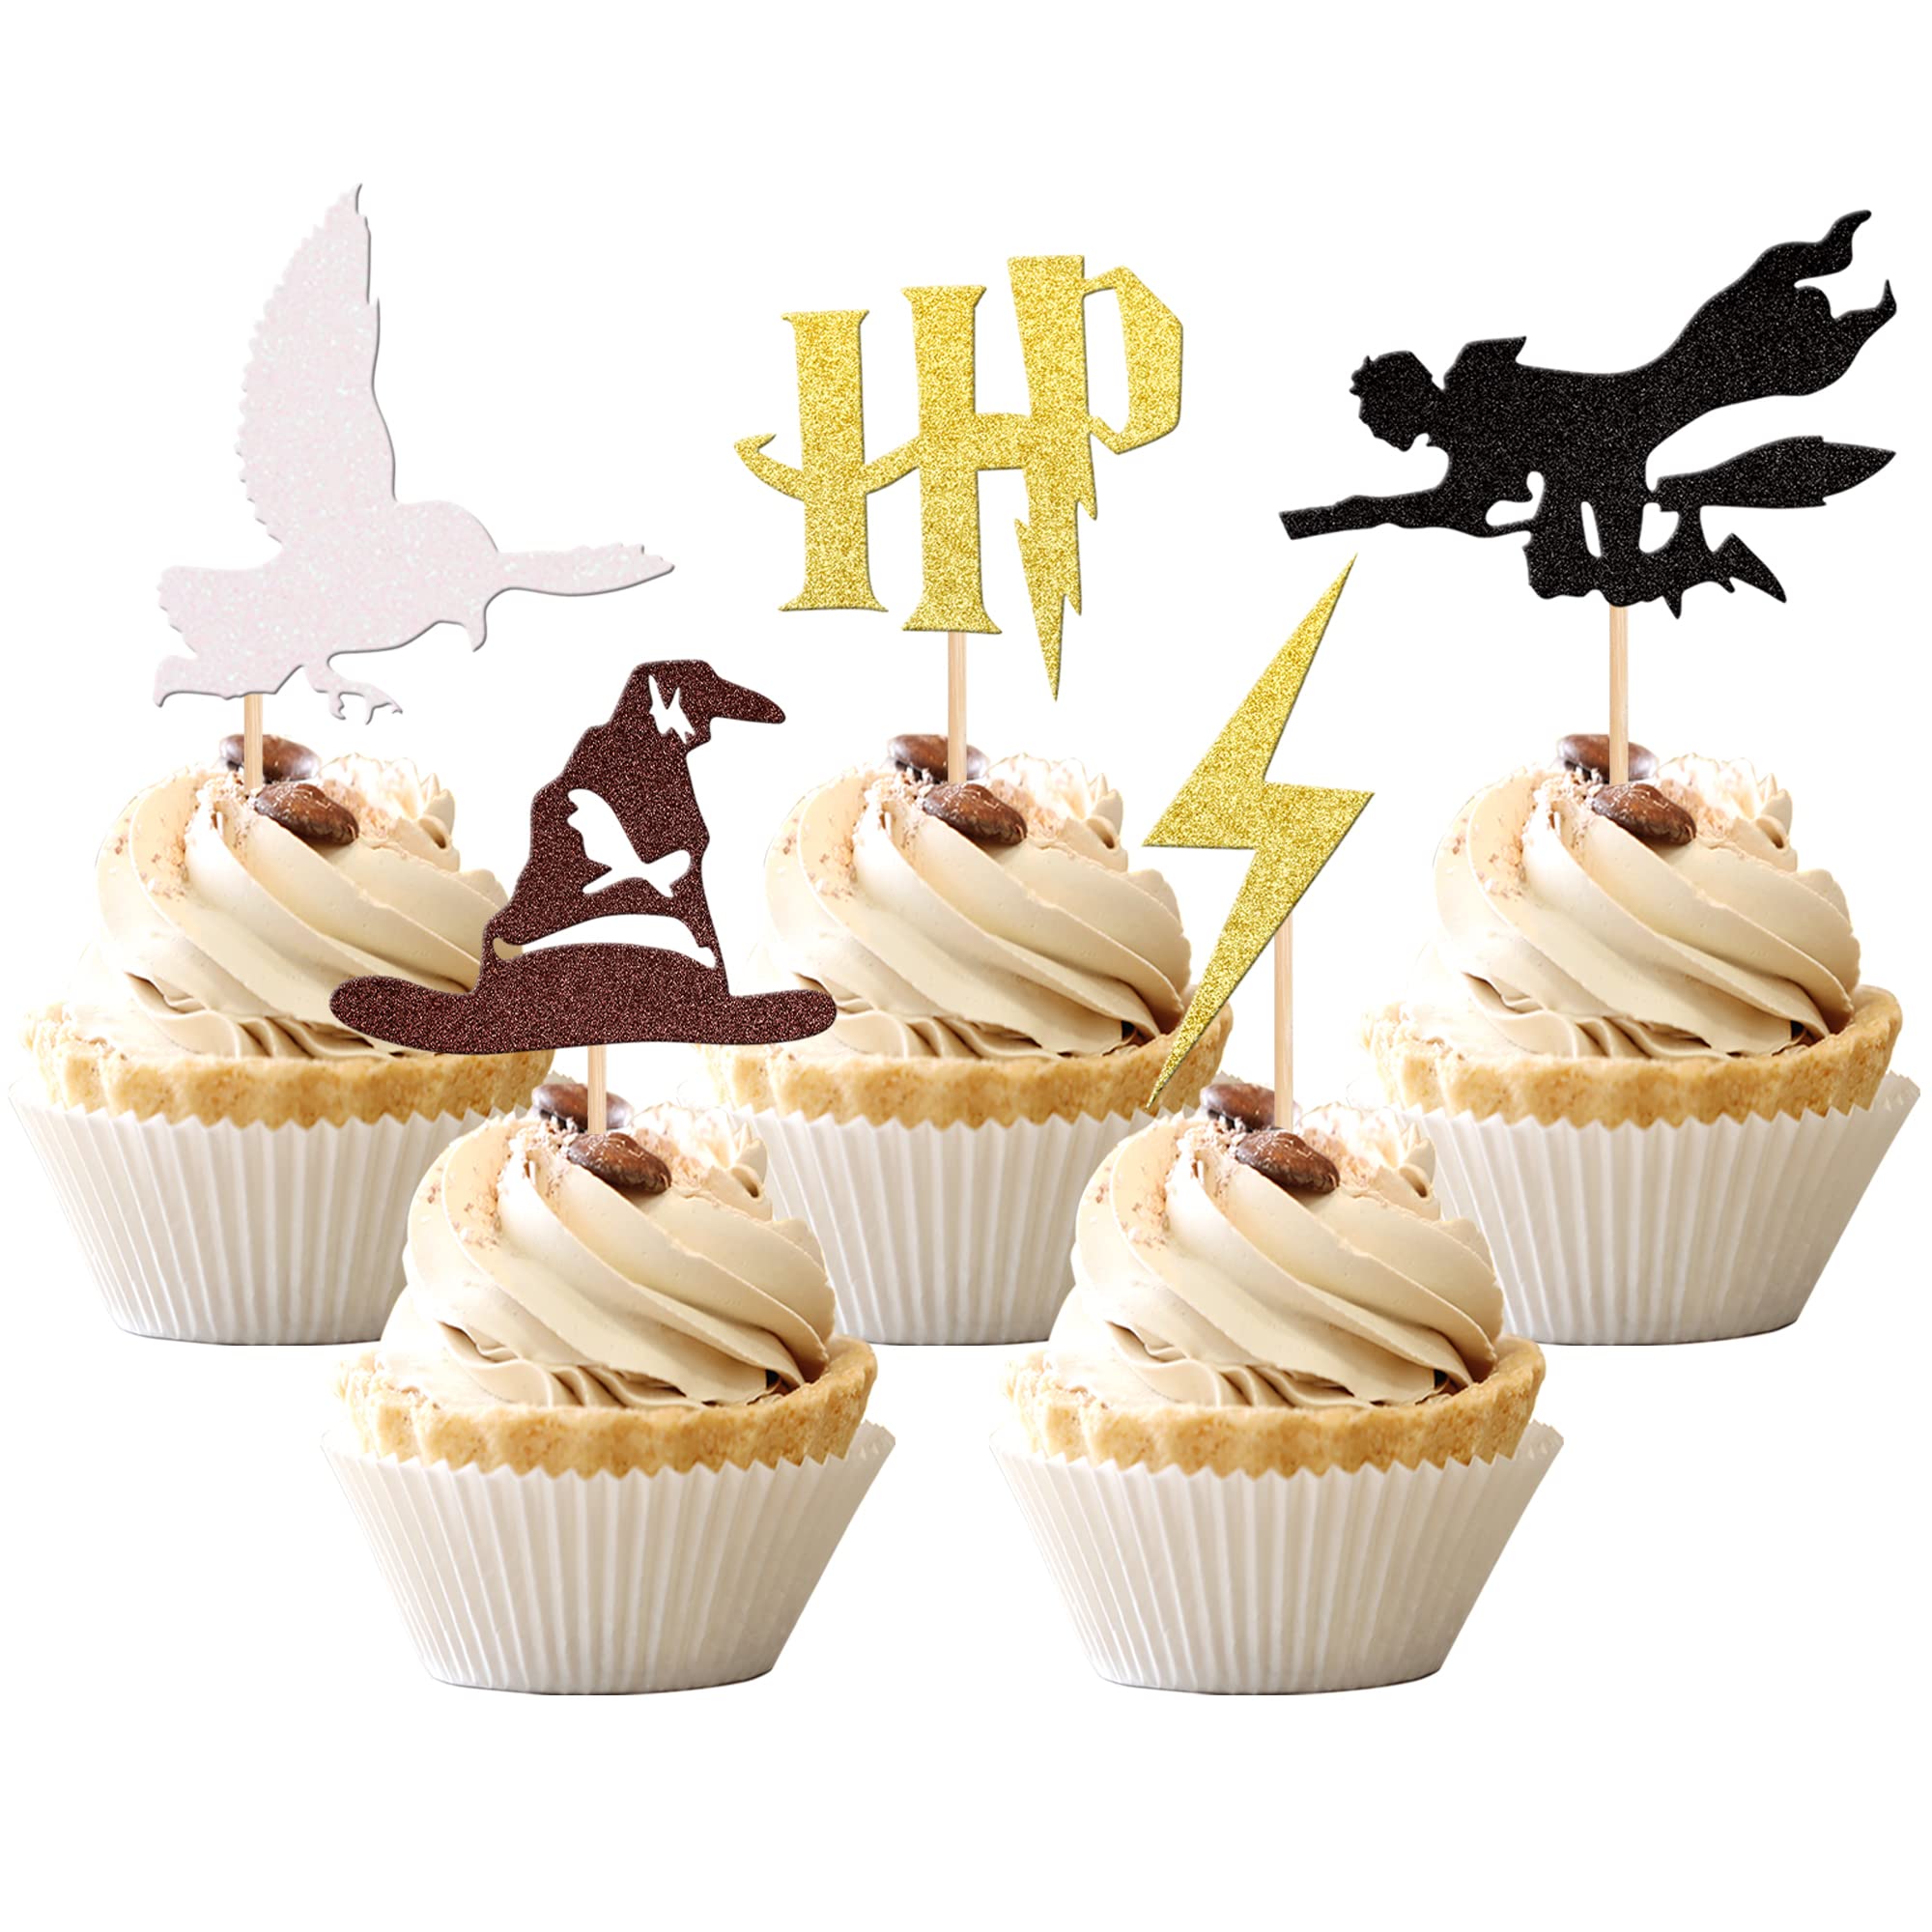 32 Super Cute Decorations for Harry Potter Party Supplies - Cake Topper for Harry  Potter Birthday Party Supplies - Cupcake Topper for Harry Potter Party -  Cake …